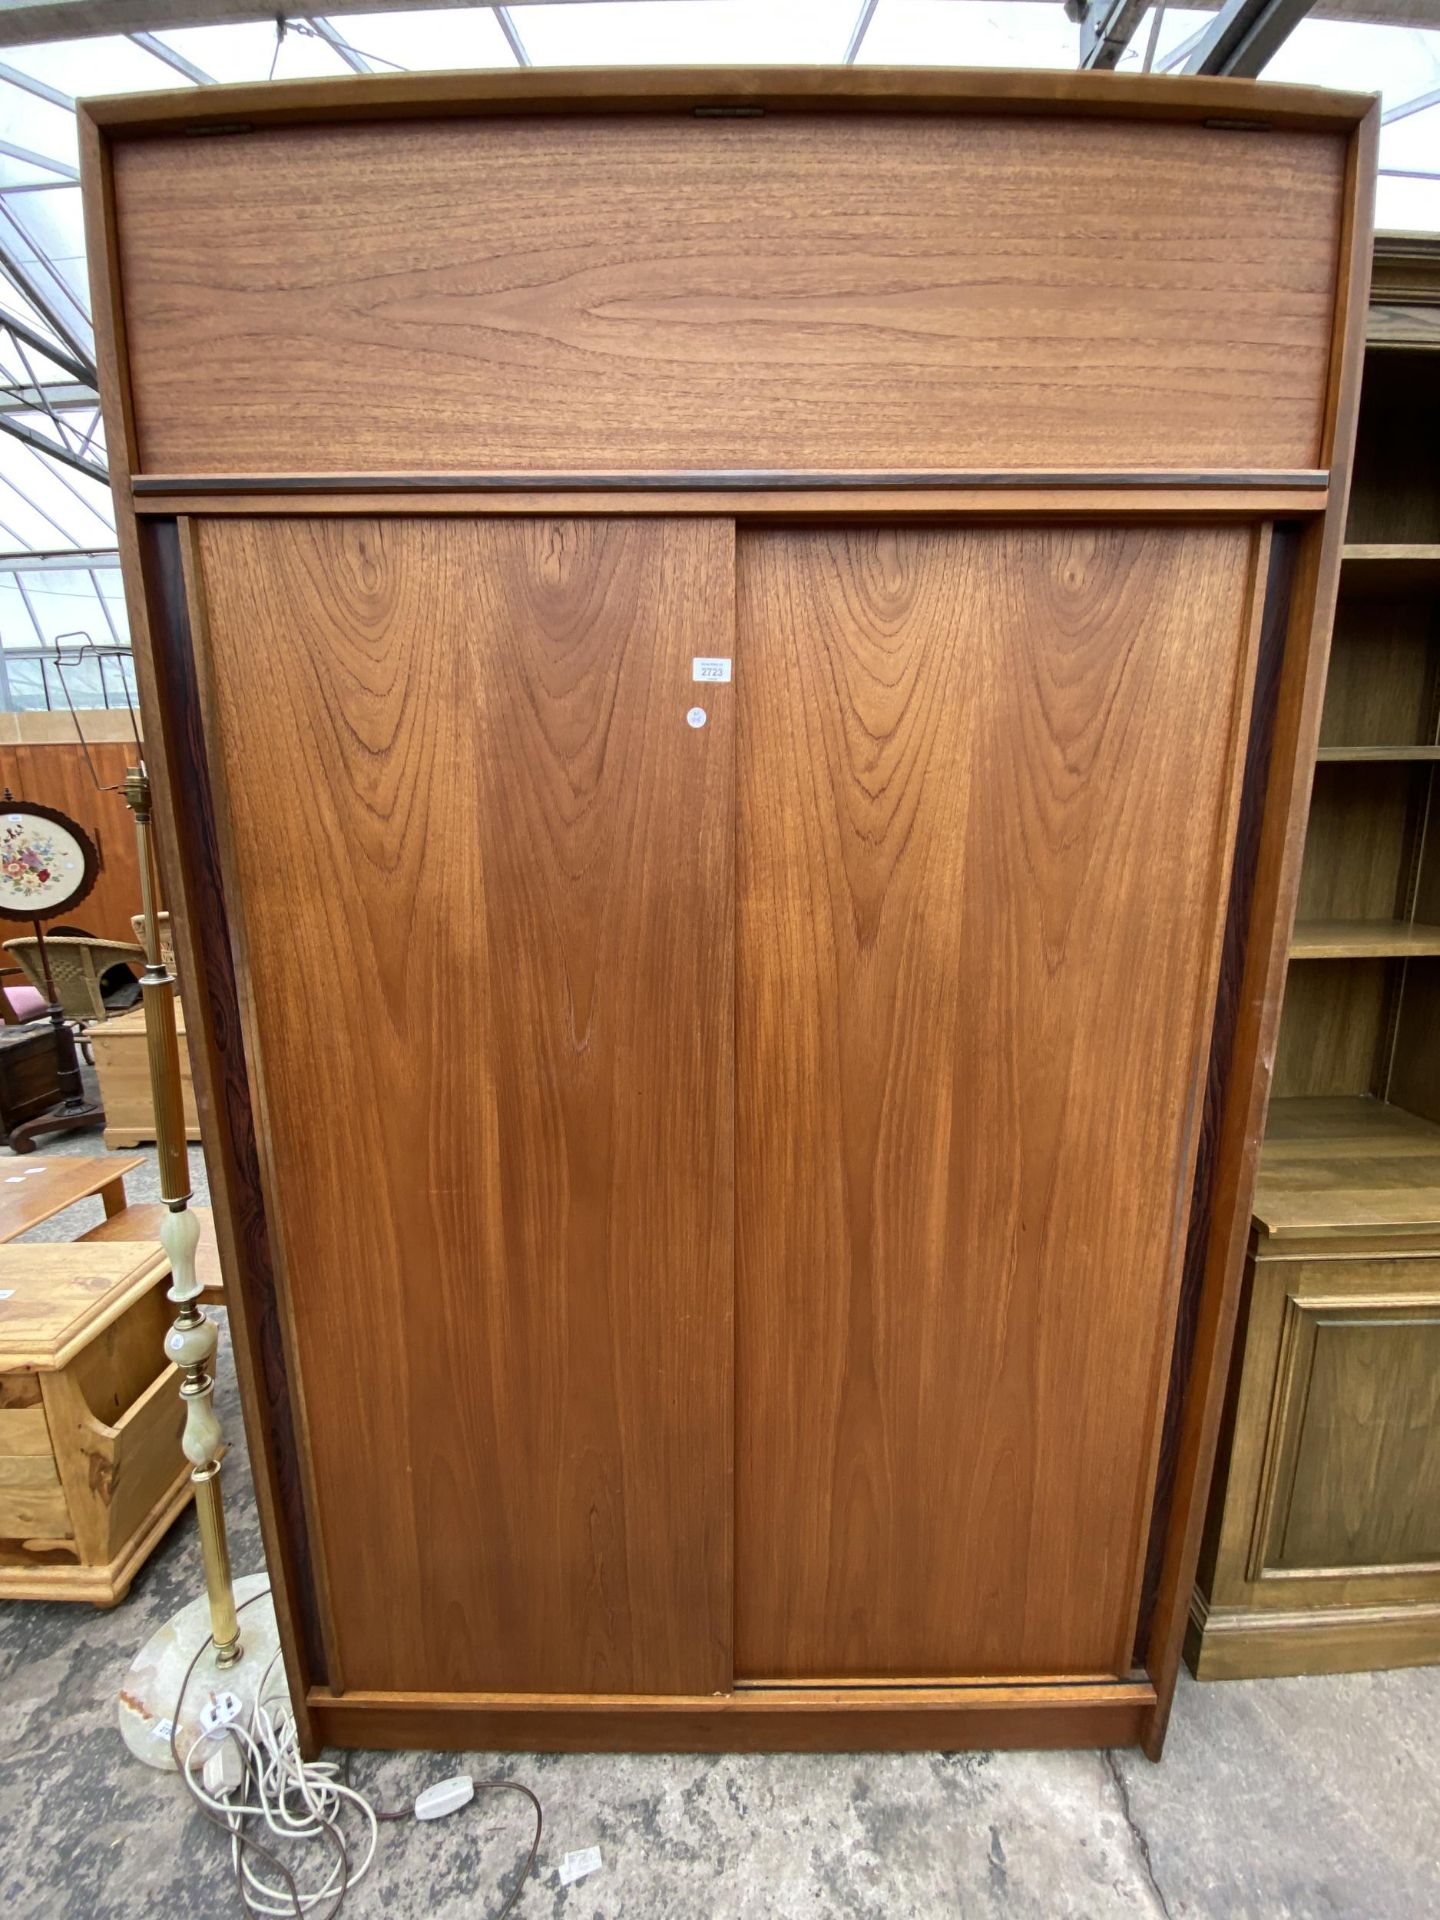 A RETRO TEAK AUSTINSUITE SLIDING TWO DOOR WARDROBE WITH TOP STORAGE SECTION, 48" WIDE, ON CASTERS